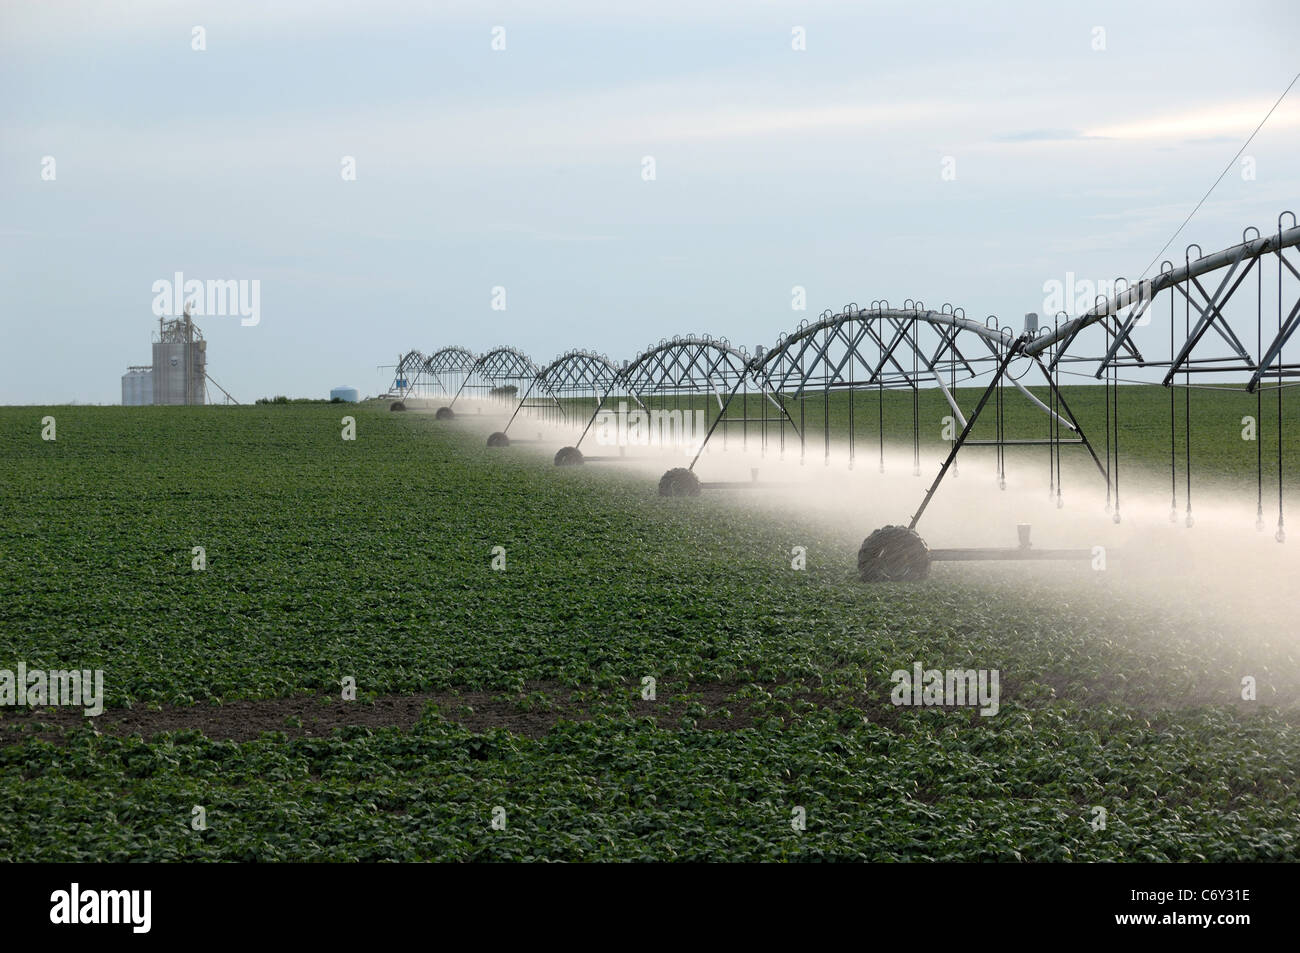 Commercial farm irrigation sprayer spraying crop with water. Grain elevator in background. Stock Photo